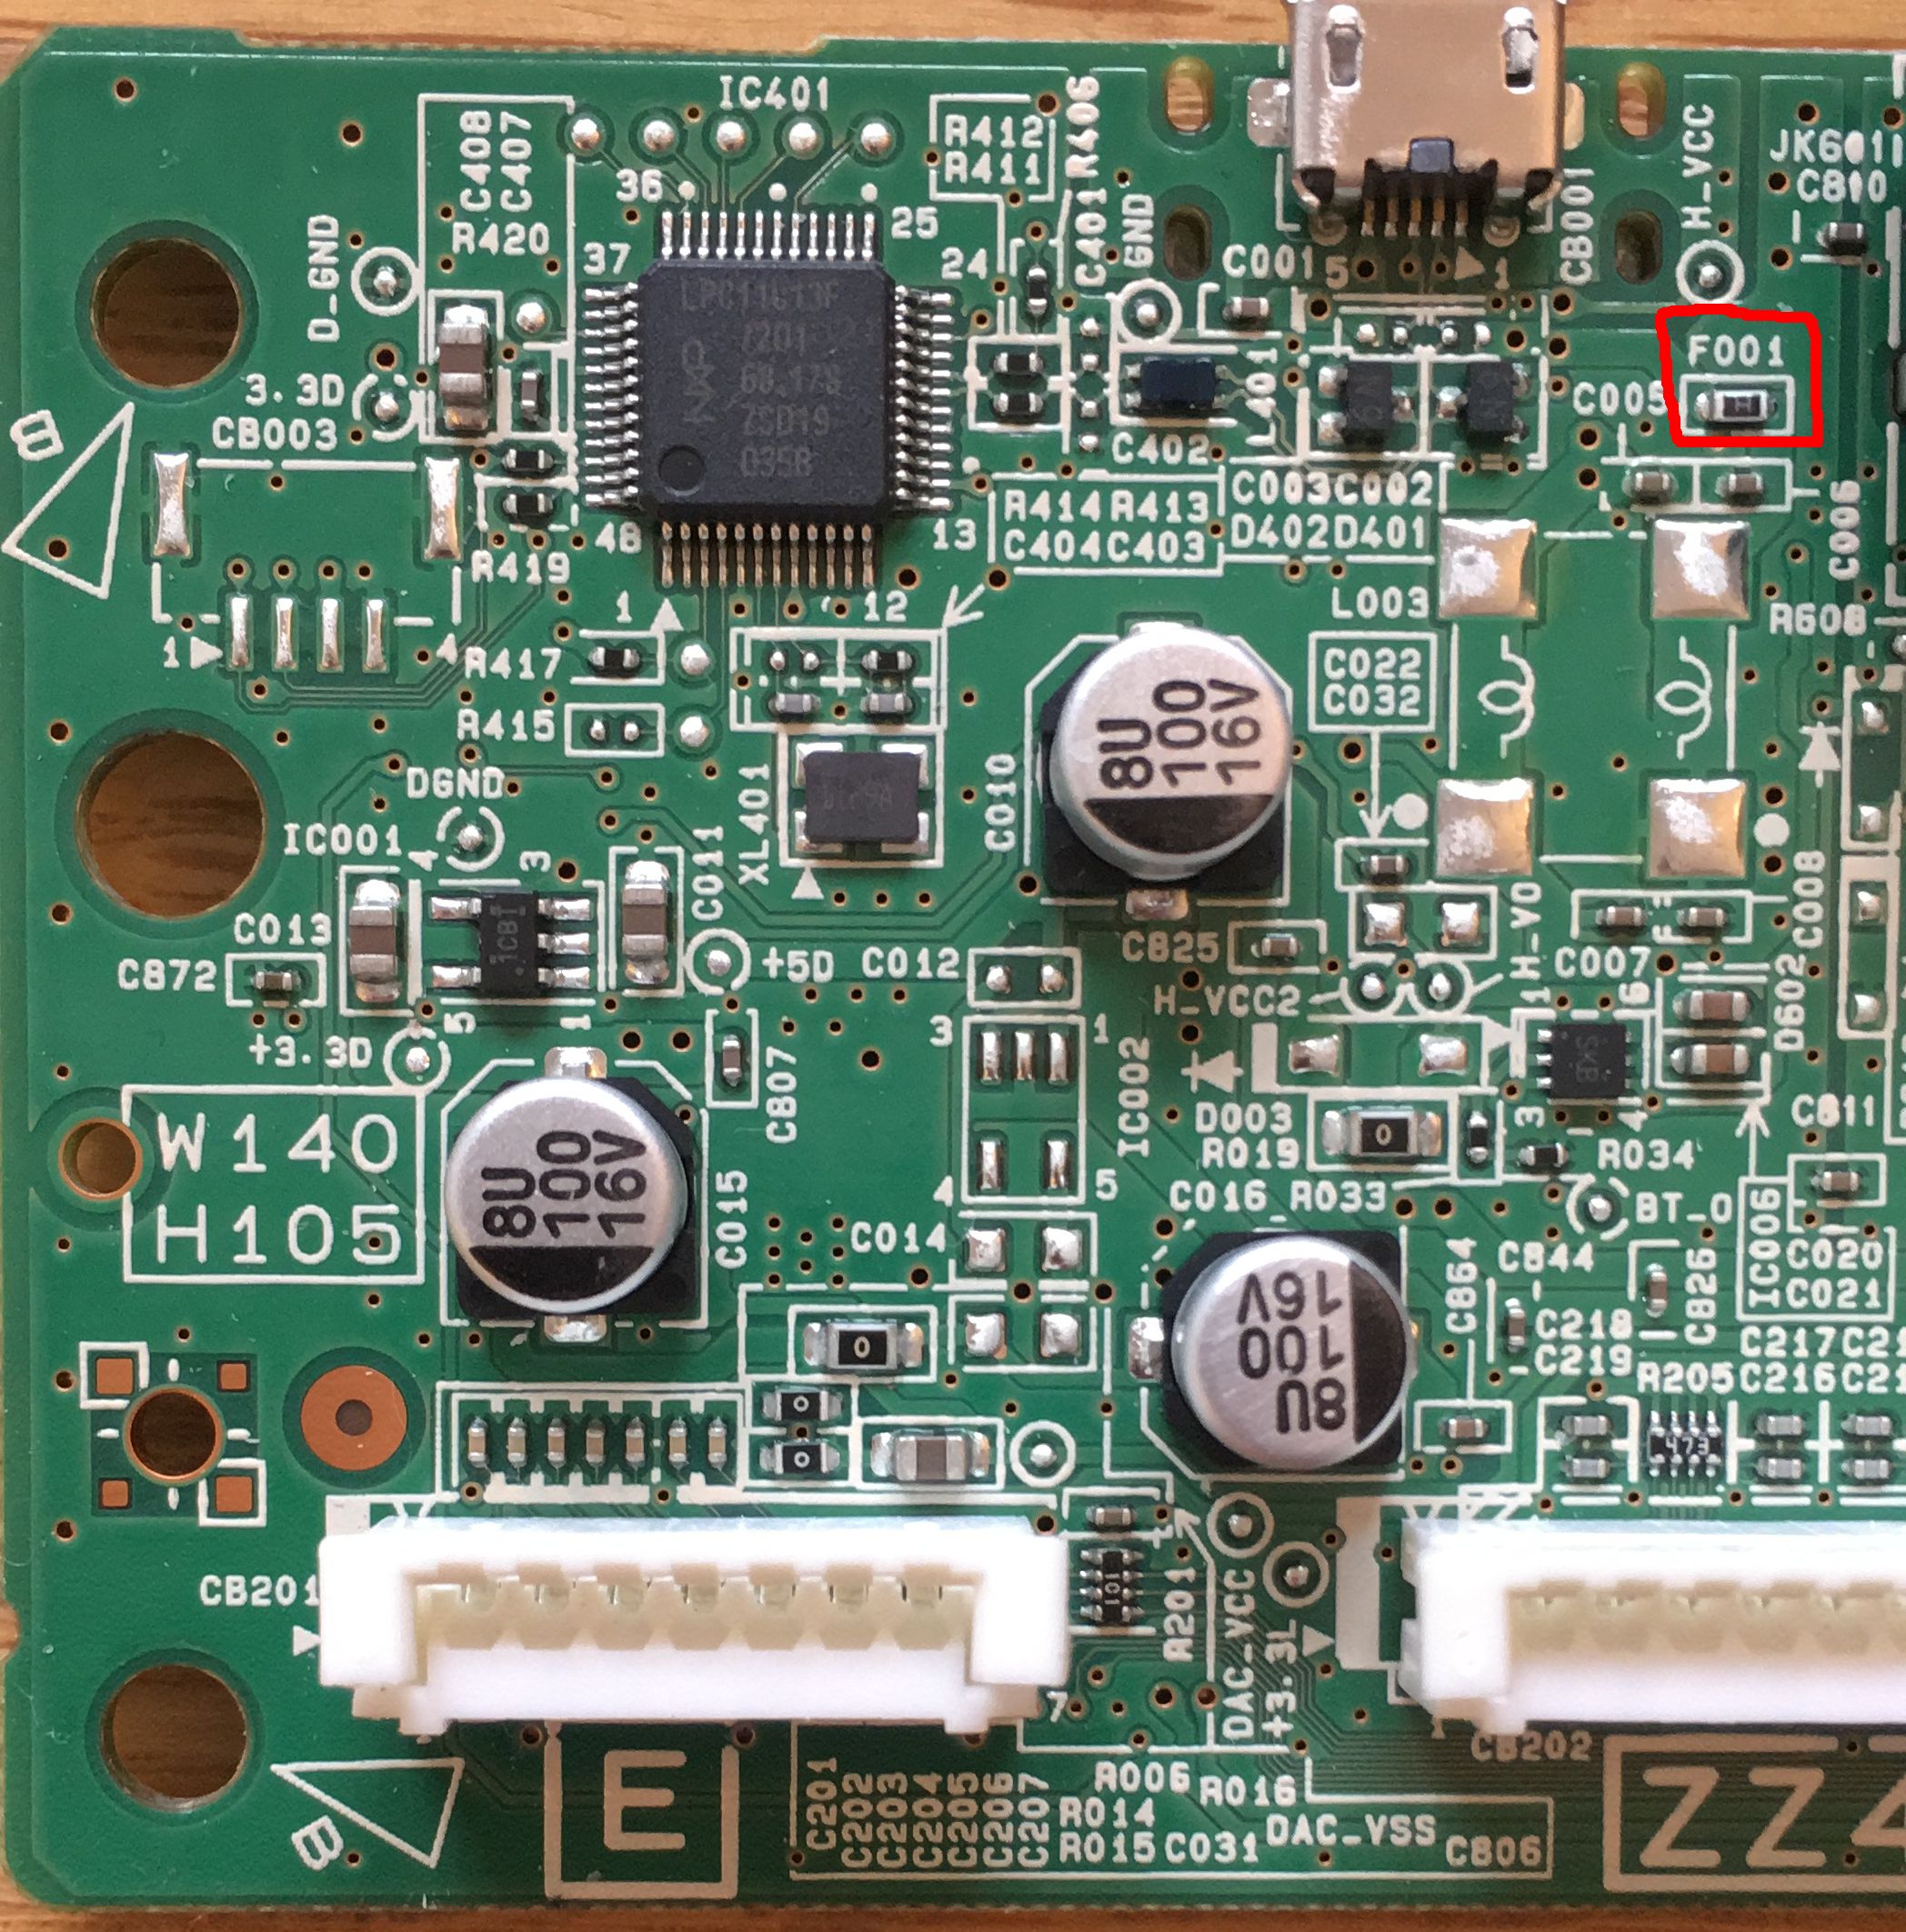 A photo of the circuit board with component F001 circled (near the unpopulated twin inductors)